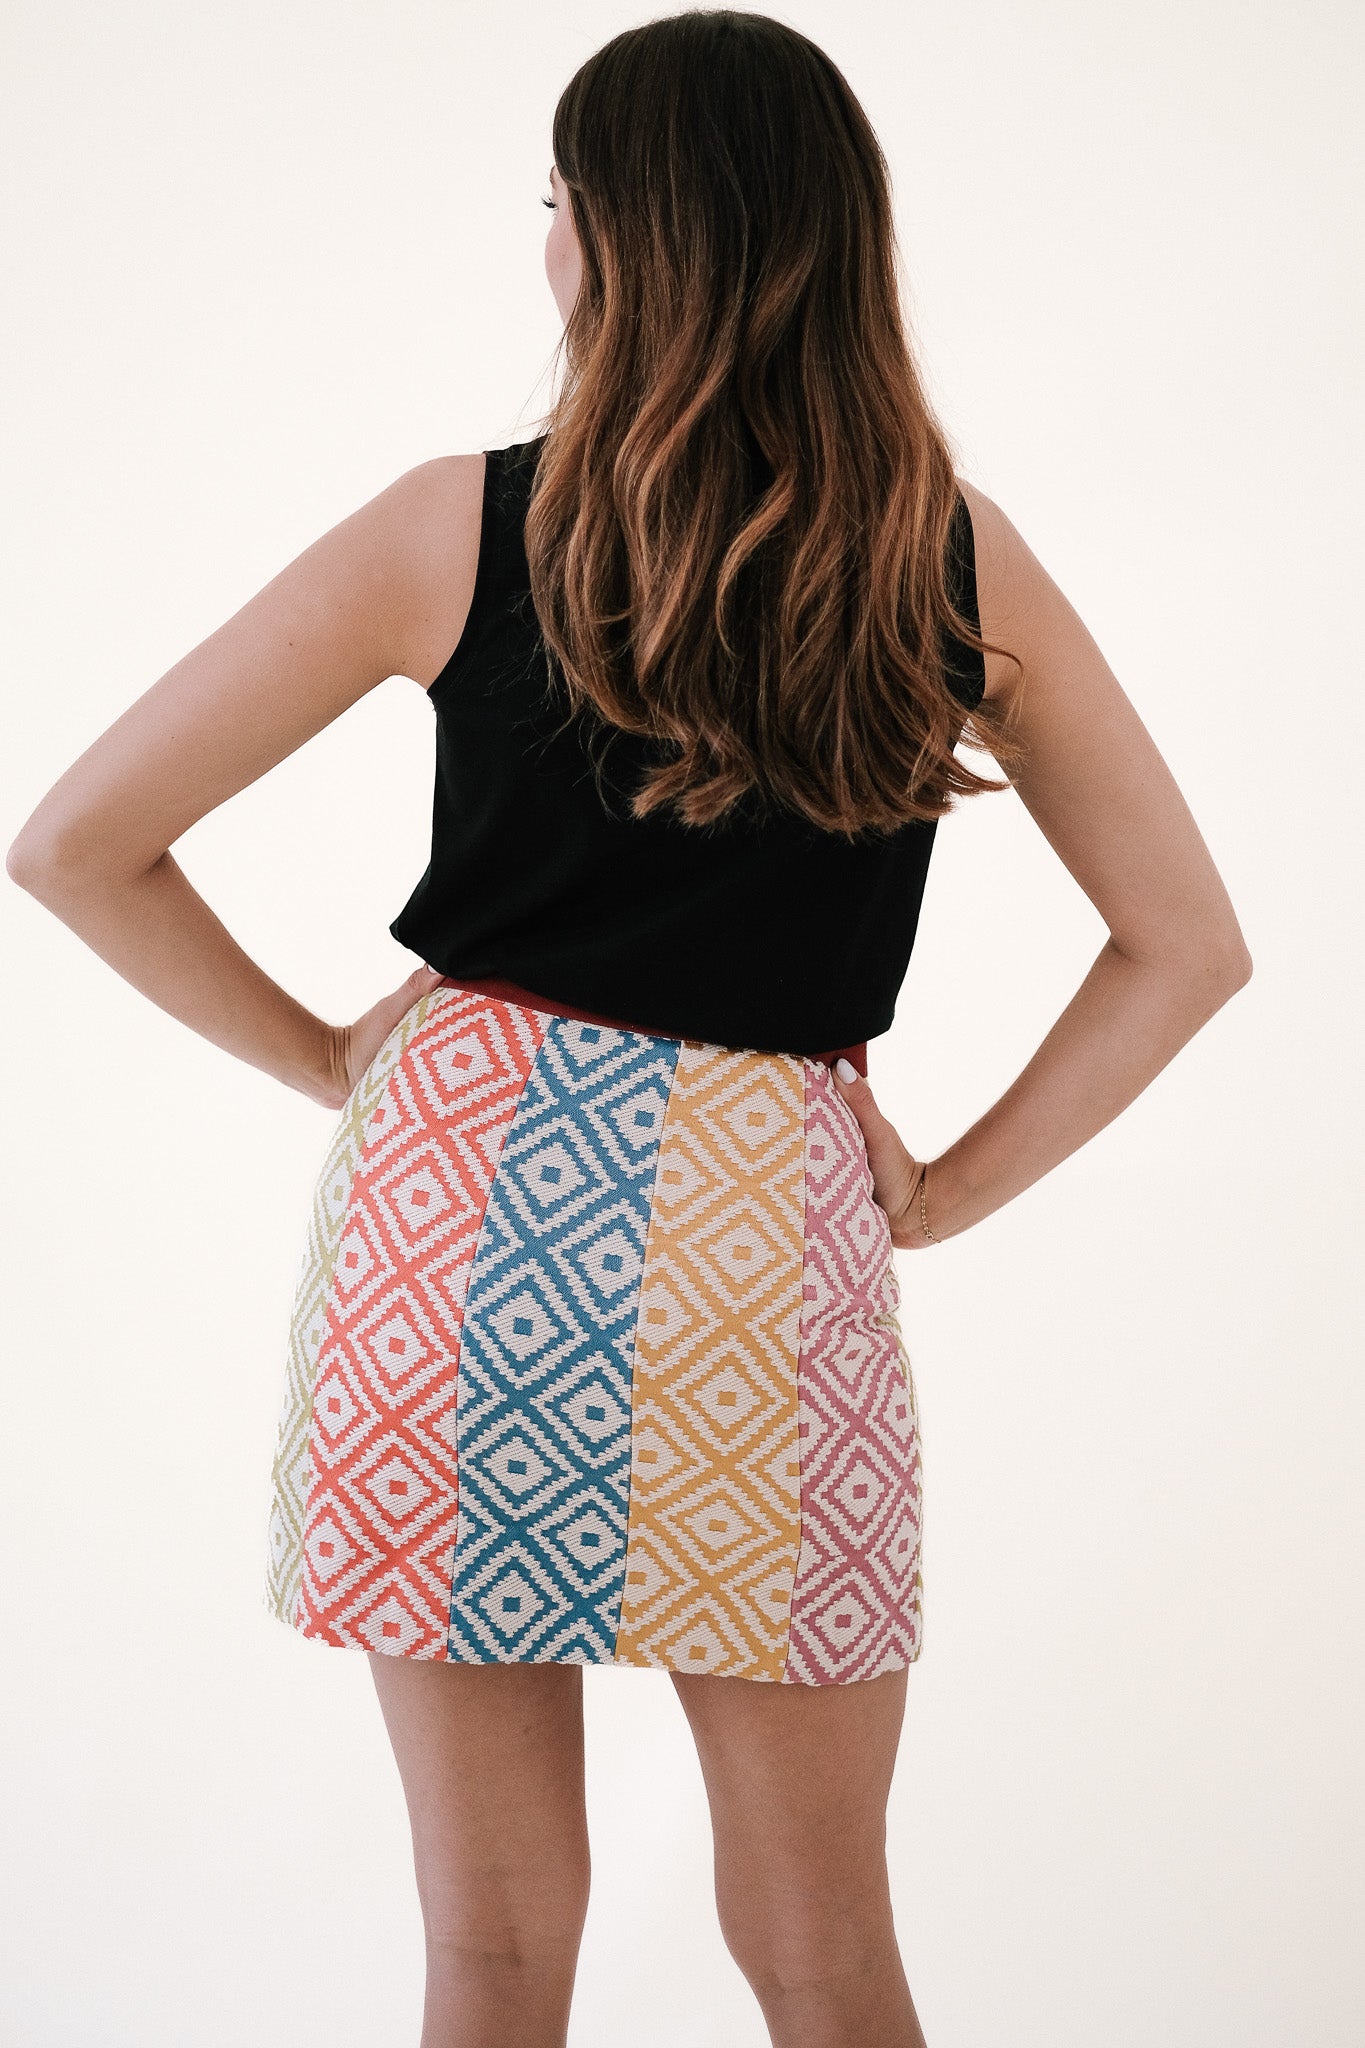 FRNCH Salome Multicolored Geometric Knit Skirt